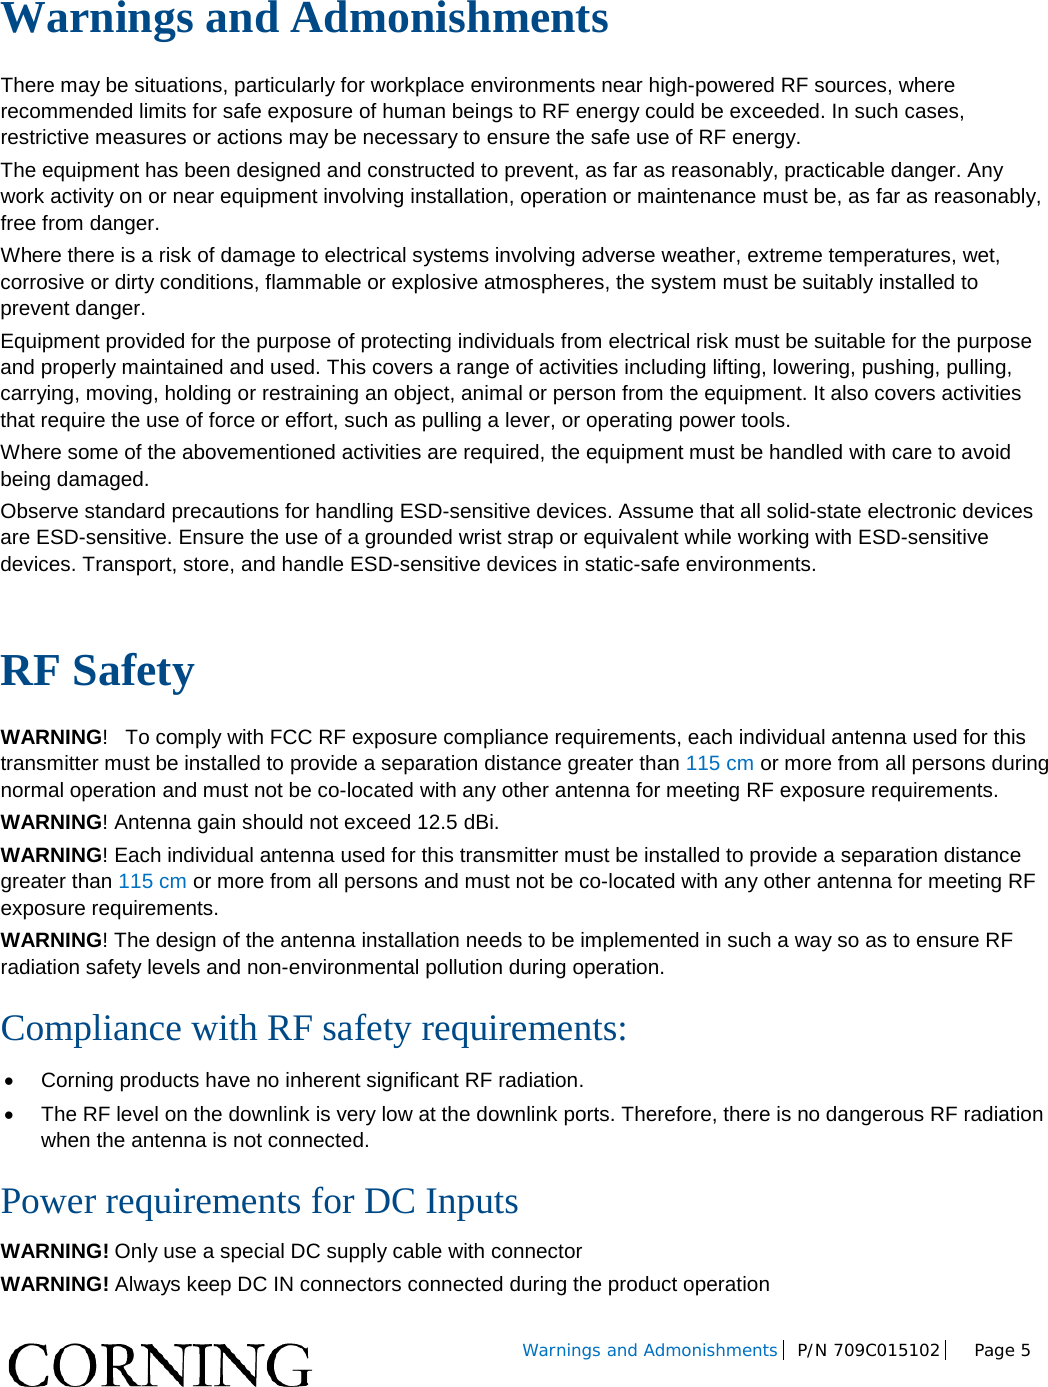         Warnings and Admonishments P/N 709C015102  Page 5    Warnings and Admonishments There may be situations, particularly for workplace environments near high-powered RF sources, where recommended limits for safe exposure of human beings to RF energy could be exceeded. In such cases, restrictive measures or actions may be necessary to ensure the safe use of RF energy. The equipment has been designed and constructed to prevent, as far as reasonably, practicable danger. Any work activity on or near equipment involving installation, operation or maintenance must be, as far as reasonably, free from danger. Where there is a risk of damage to electrical systems involving adverse weather, extreme temperatures, wet, corrosive or dirty conditions, flammable or explosive atmospheres, the system must be suitably installed to prevent danger. Equipment provided for the purpose of protecting individuals from electrical risk must be suitable for the purpose and properly maintained and used. This covers a range of activities including lifting, lowering, pushing, pulling, carrying, moving, holding or restraining an object, animal or person from the equipment. It also covers activities that require the use of force or effort, such as pulling a lever, or operating power tools. Where some of the abovementioned activities are required, the equipment must be handled with care to avoid being damaged. Observe standard precautions for handling ESD-sensitive devices. Assume that all solid-state electronic devices are ESD-sensitive. Ensure the use of a grounded wrist strap or equivalent while working with ESD-sensitive devices. Transport, store, and handle ESD-sensitive devices in static-safe environments.  RF Safety WARNING!   To comply with FCC RF exposure compliance requirements, each individual antenna used for this transmitter must be installed to provide a separation distance greater than 115 cm or more from all persons during normal operation and must not be co-located with any other antenna for meeting RF exposure requirements.  WARNING! Antenna gain should not exceed 12.5 dBi. WARNING! Each individual antenna used for this transmitter must be installed to provide a separation distance greater than 115 cm or more from all persons and must not be co-located with any other antenna for meeting RF exposure requirements. WARNING! The design of the antenna installation needs to be implemented in such a way so as to ensure RF radiation safety levels and non-environmental pollution during operation. Compliance with RF safety requirements: • Corning products have no inherent significant RF radiation. • The RF level on the downlink is very low at the downlink ports. Therefore, there is no dangerous RF radiation when the antenna is not connected. Power requirements for DC Inputs WARNING! Only use a special DC supply cable with connector WARNING! Always keep DC IN connectors connected during the product operation  